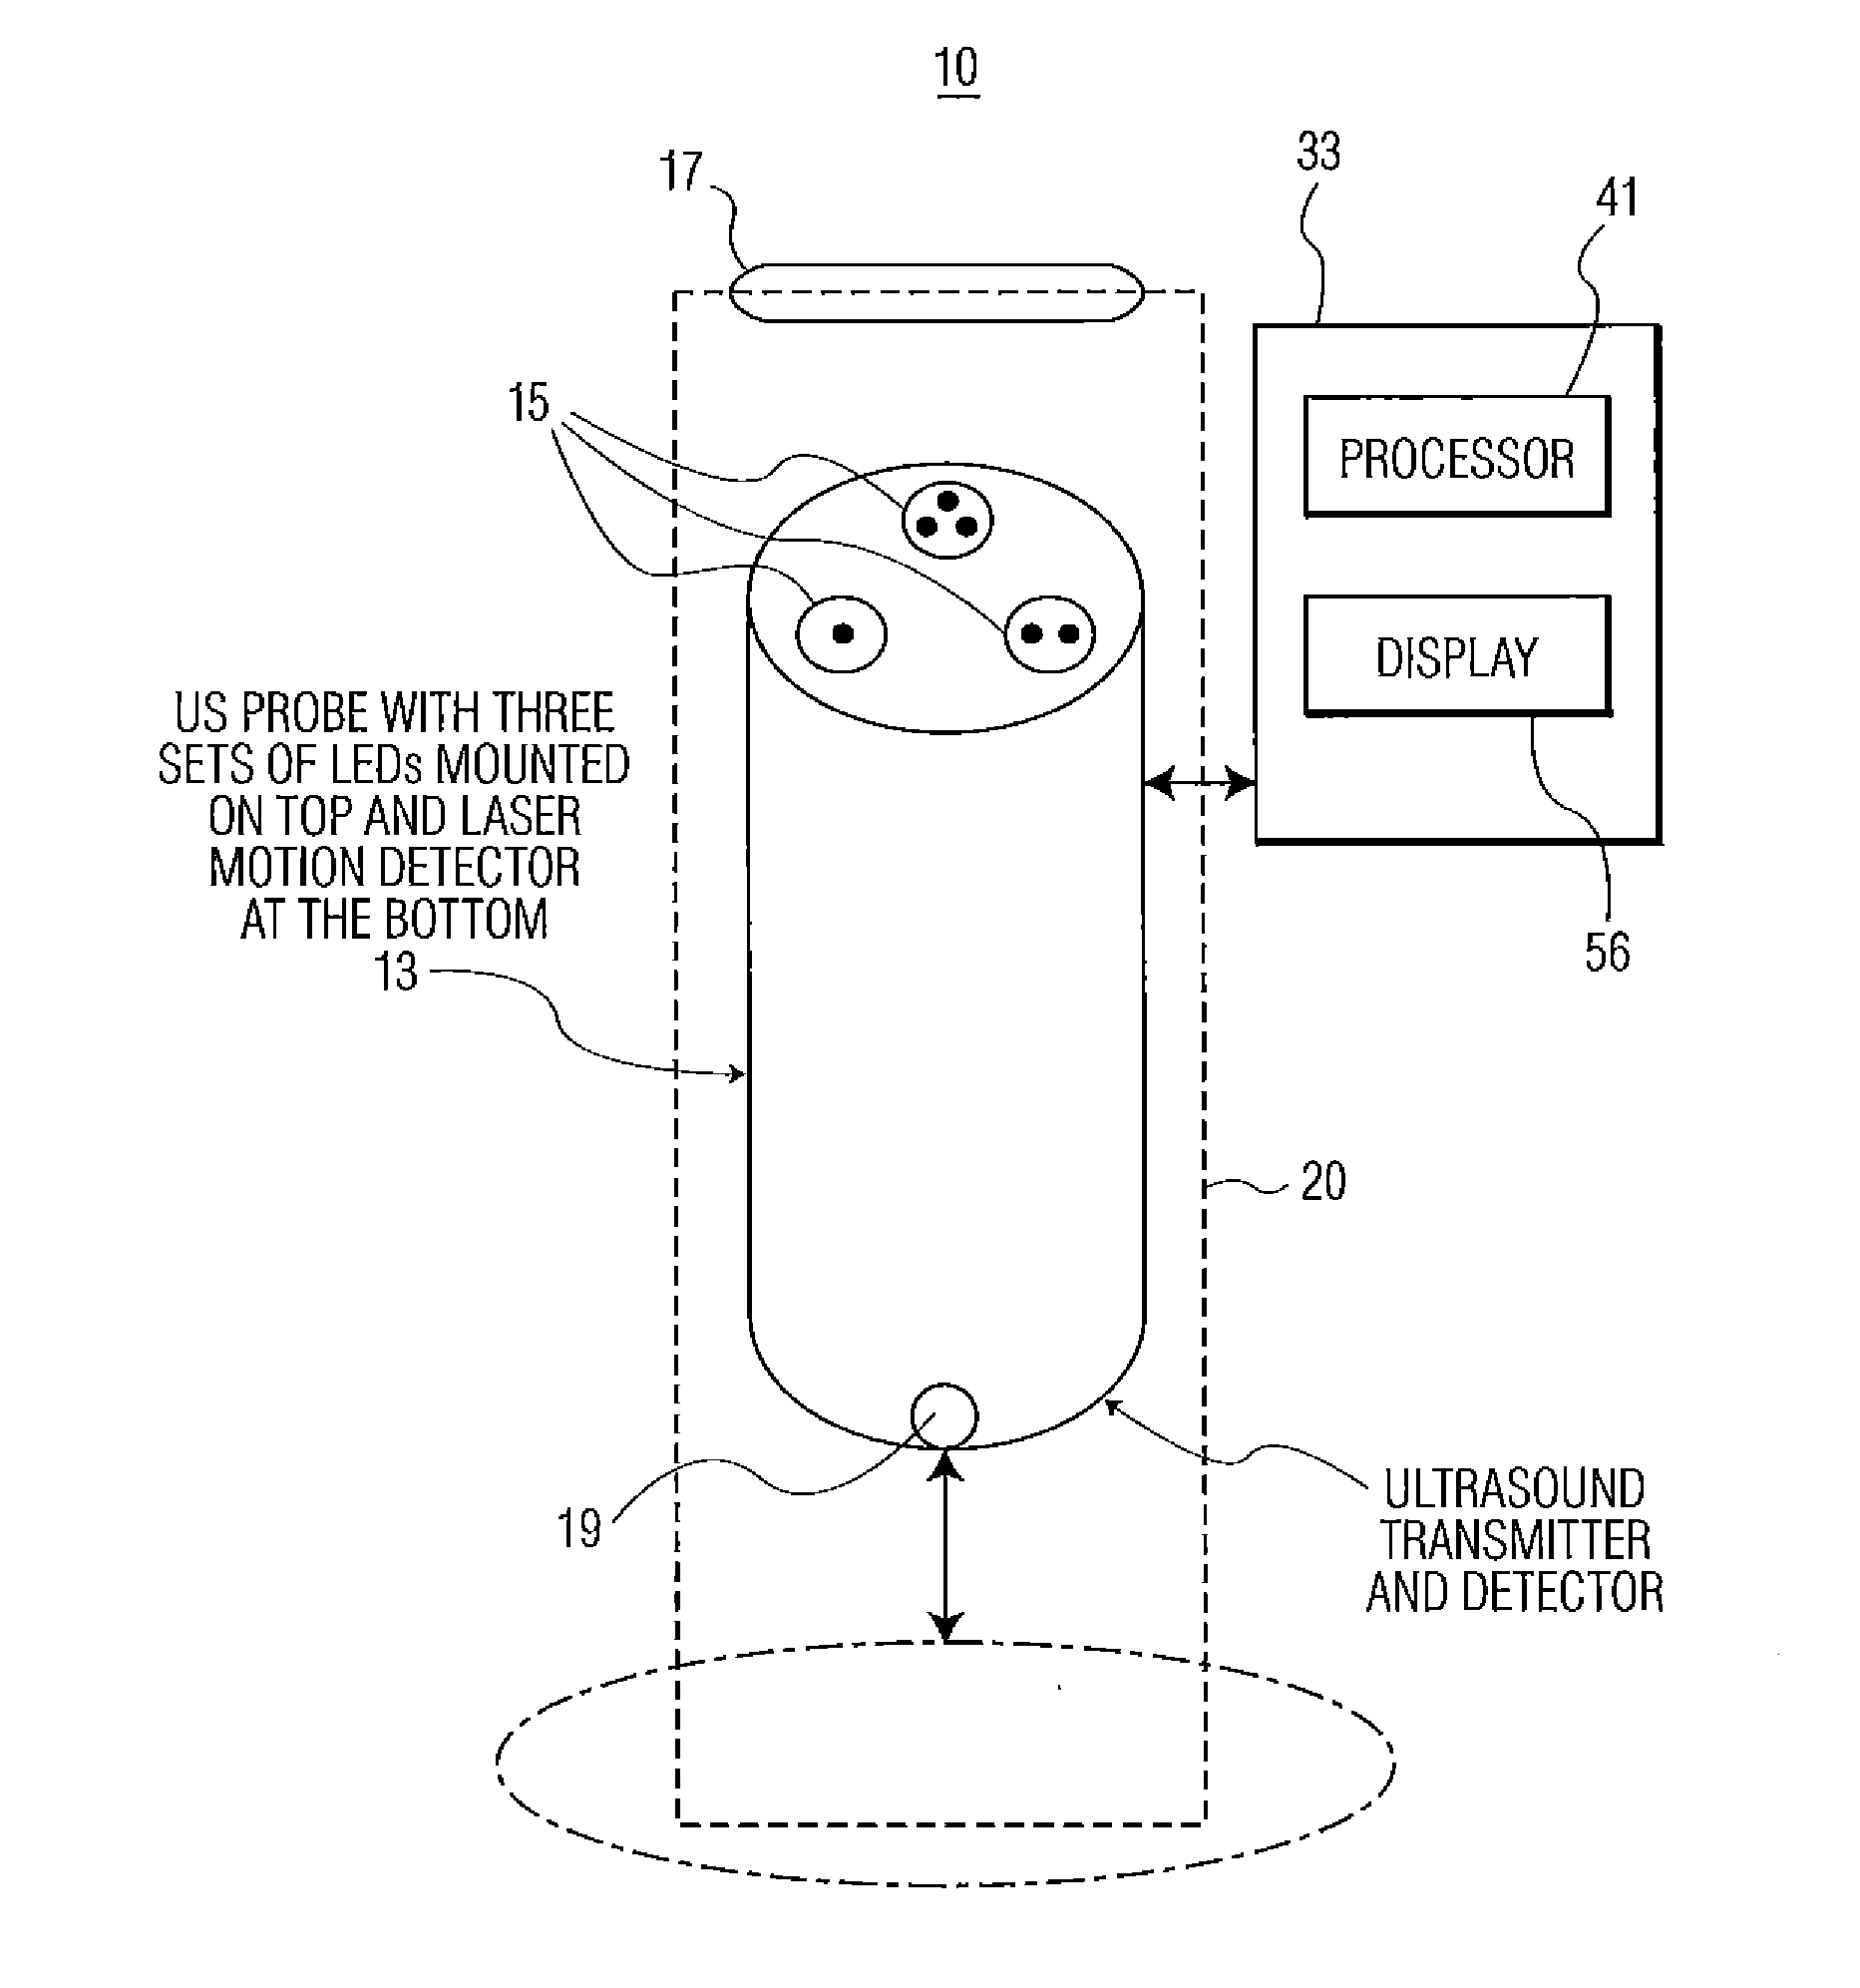 System for Locating Anatomical Objects in Ultrasound Imaging